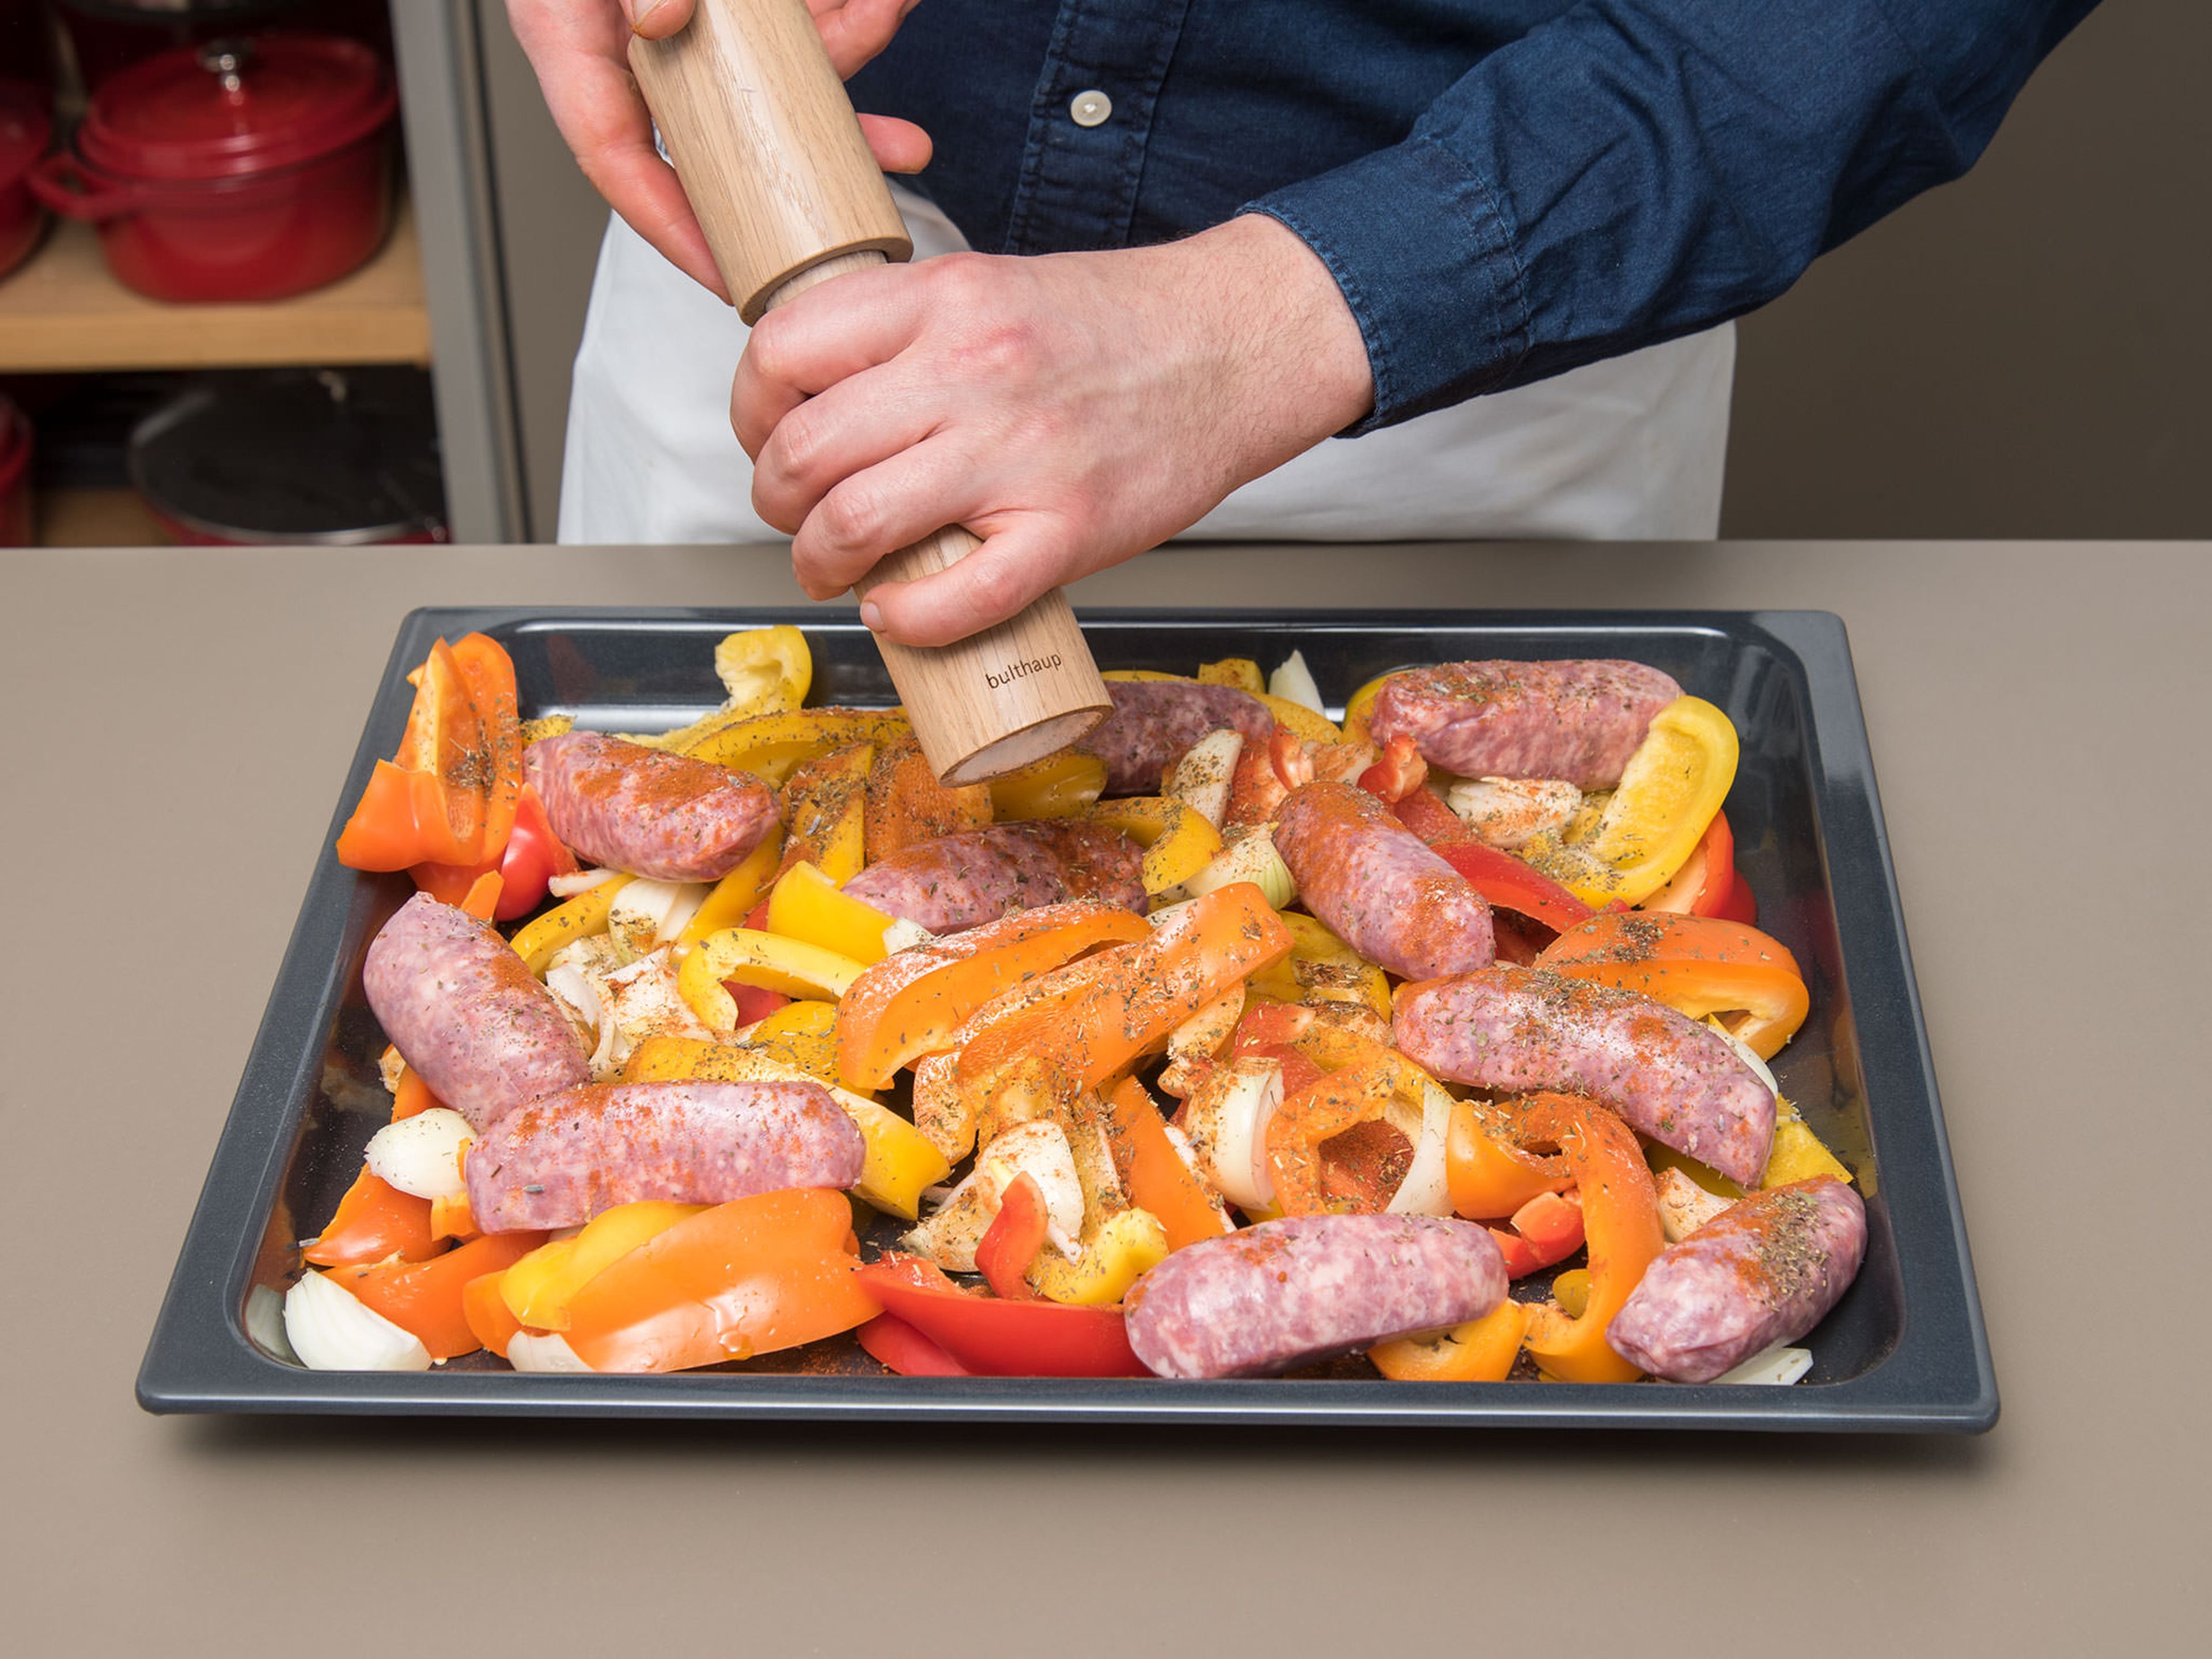 Spread onions and peppers out on a baking sheet and nestle in the sausages. Sprinkle with herbes de Provence, paprika, and oil and toss – making sure everything is coated evenly. Season with salt and pepper to taste.